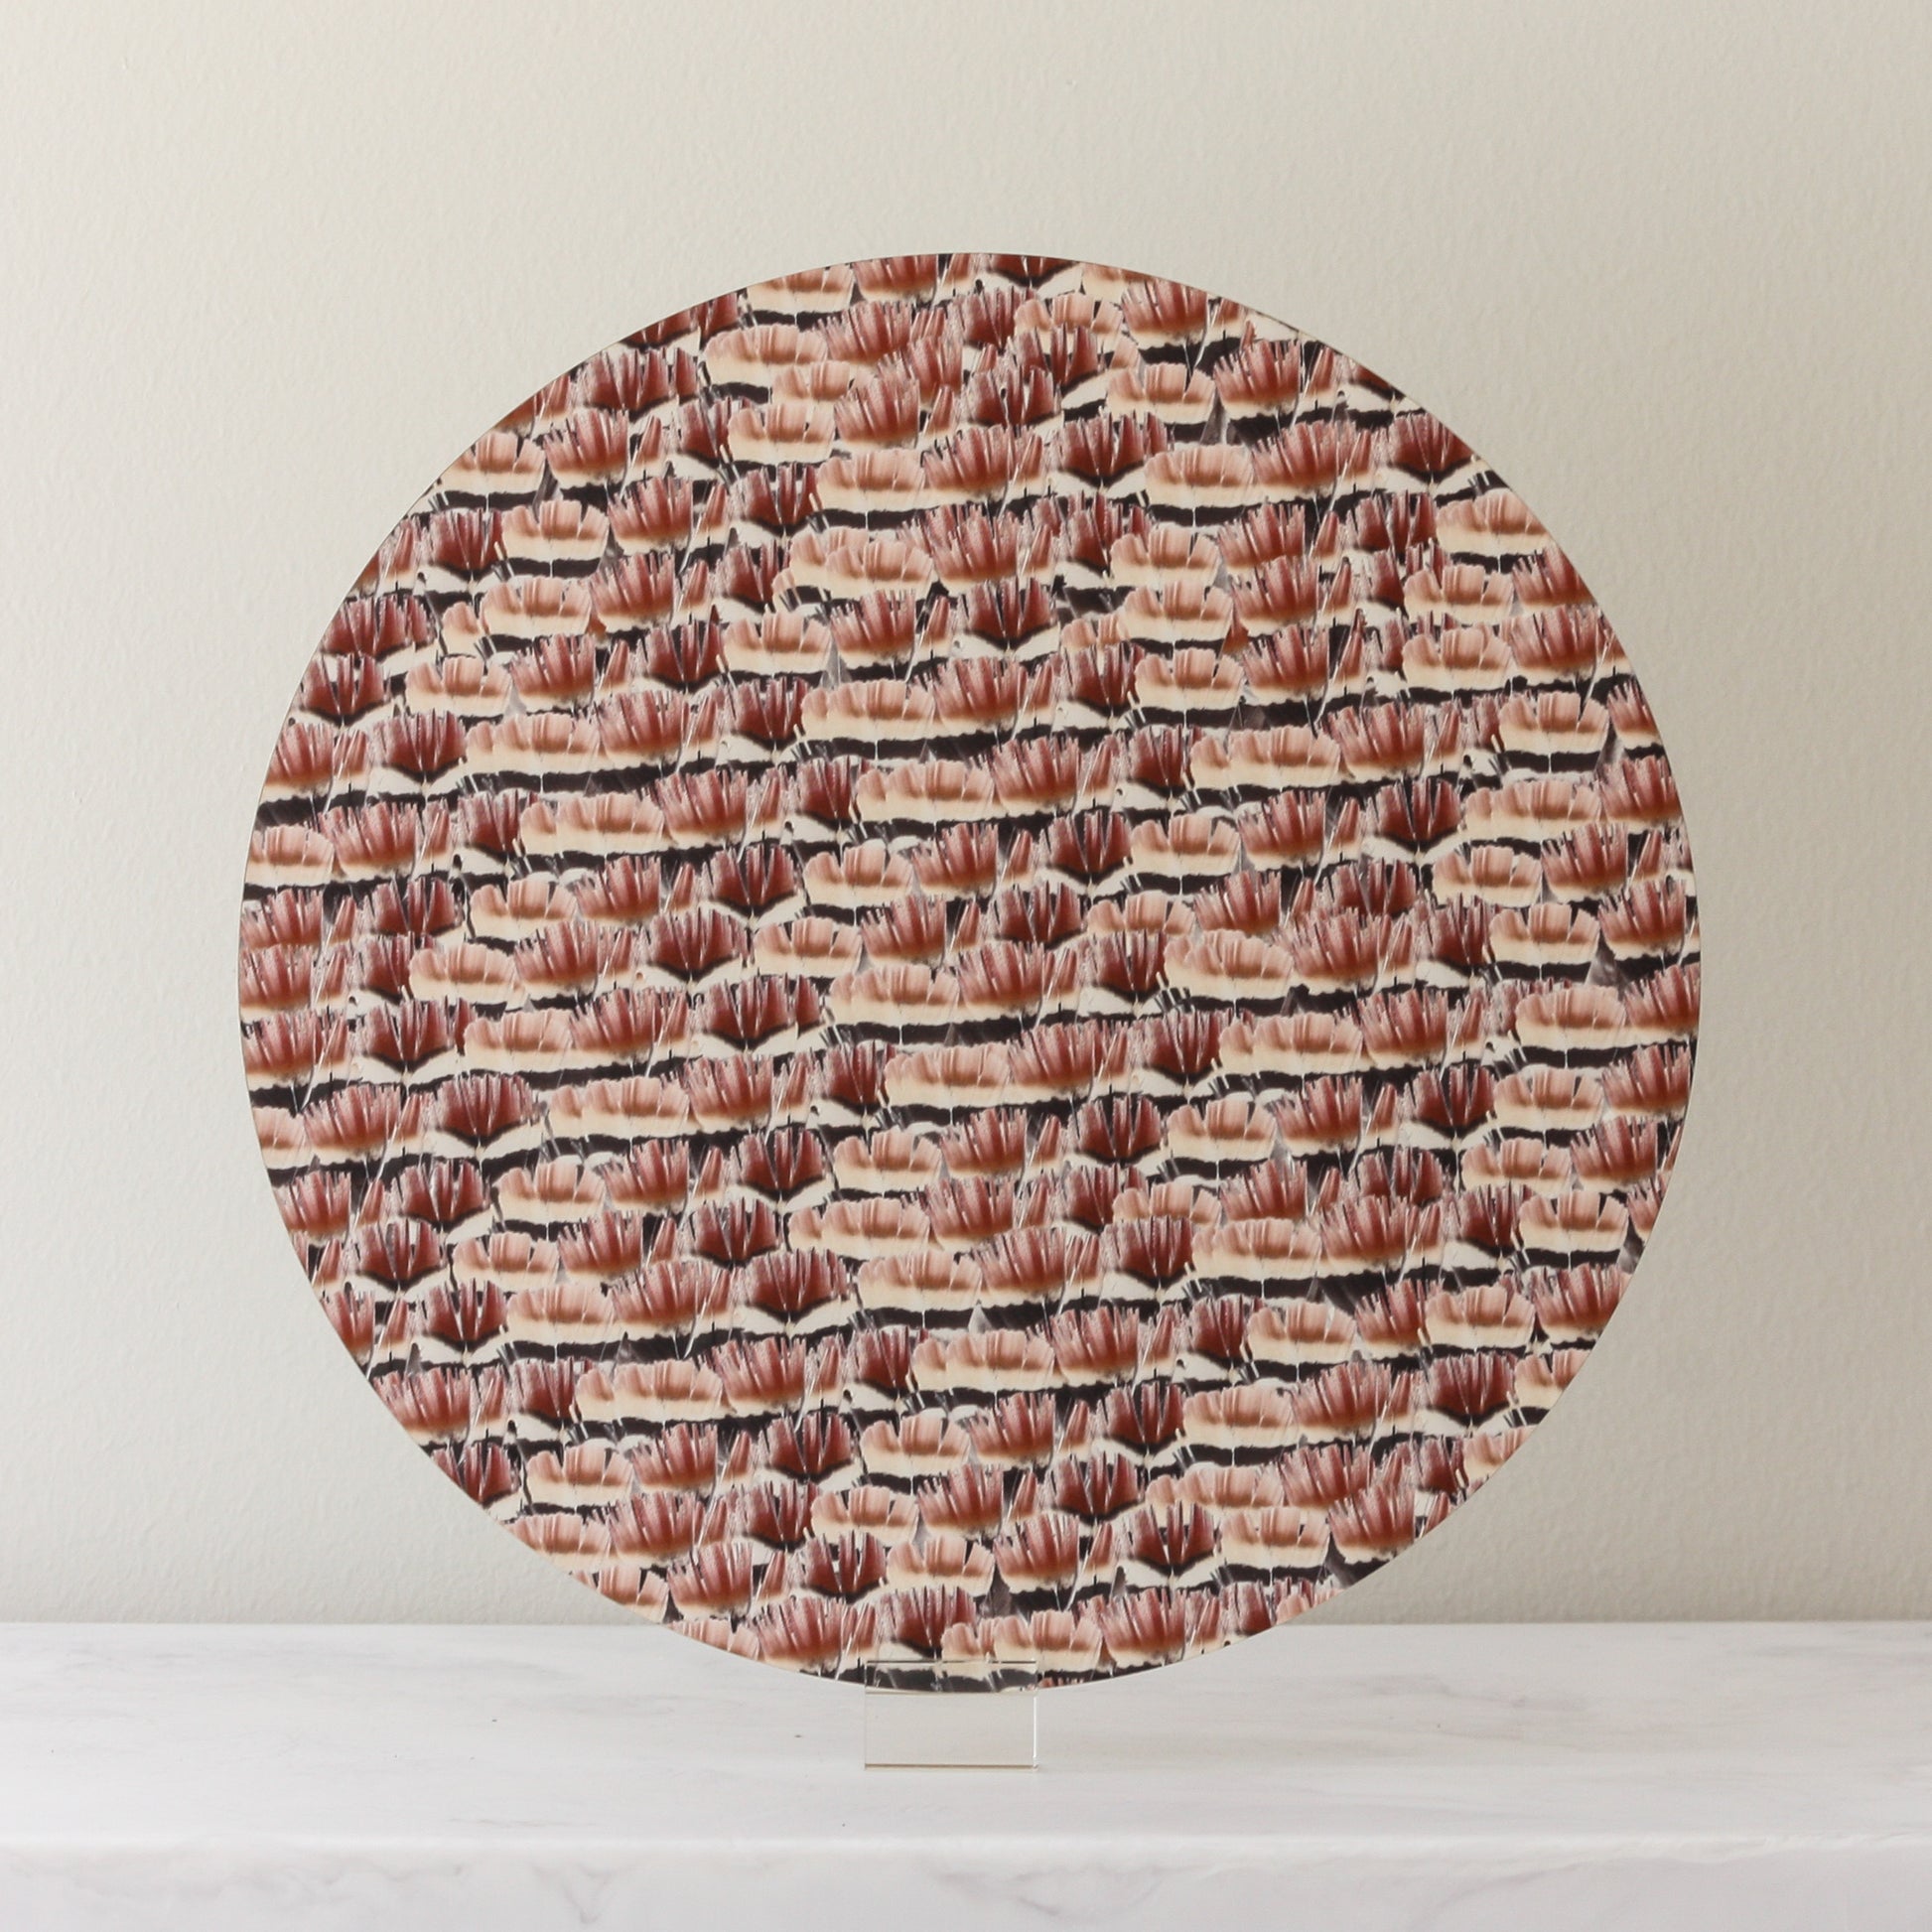 red pheasant feathers placemat made with cork and wood of colors pink and burgundy by Tisch New York 